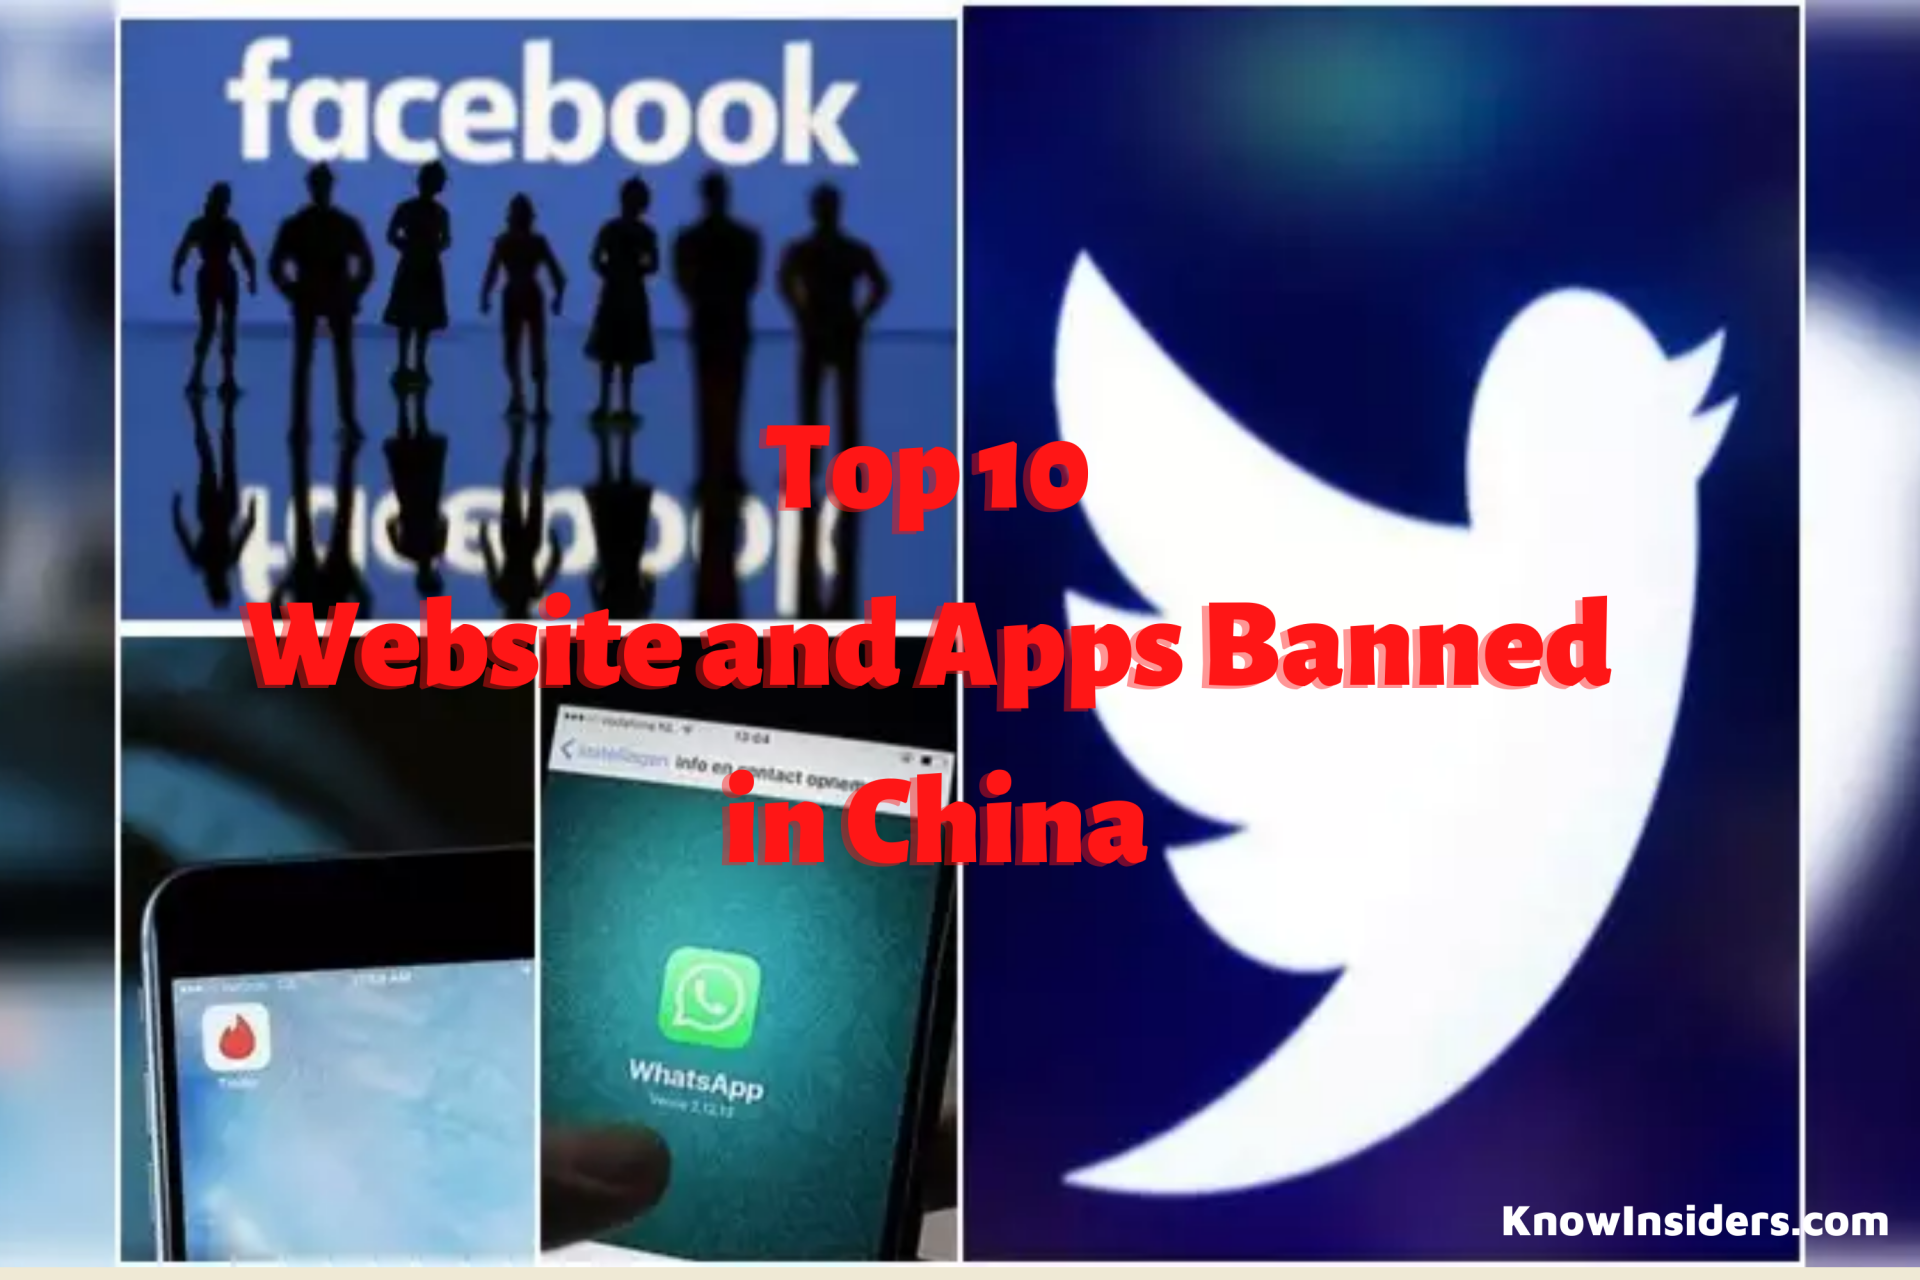 Top 10 Websites and Apps Banned in China